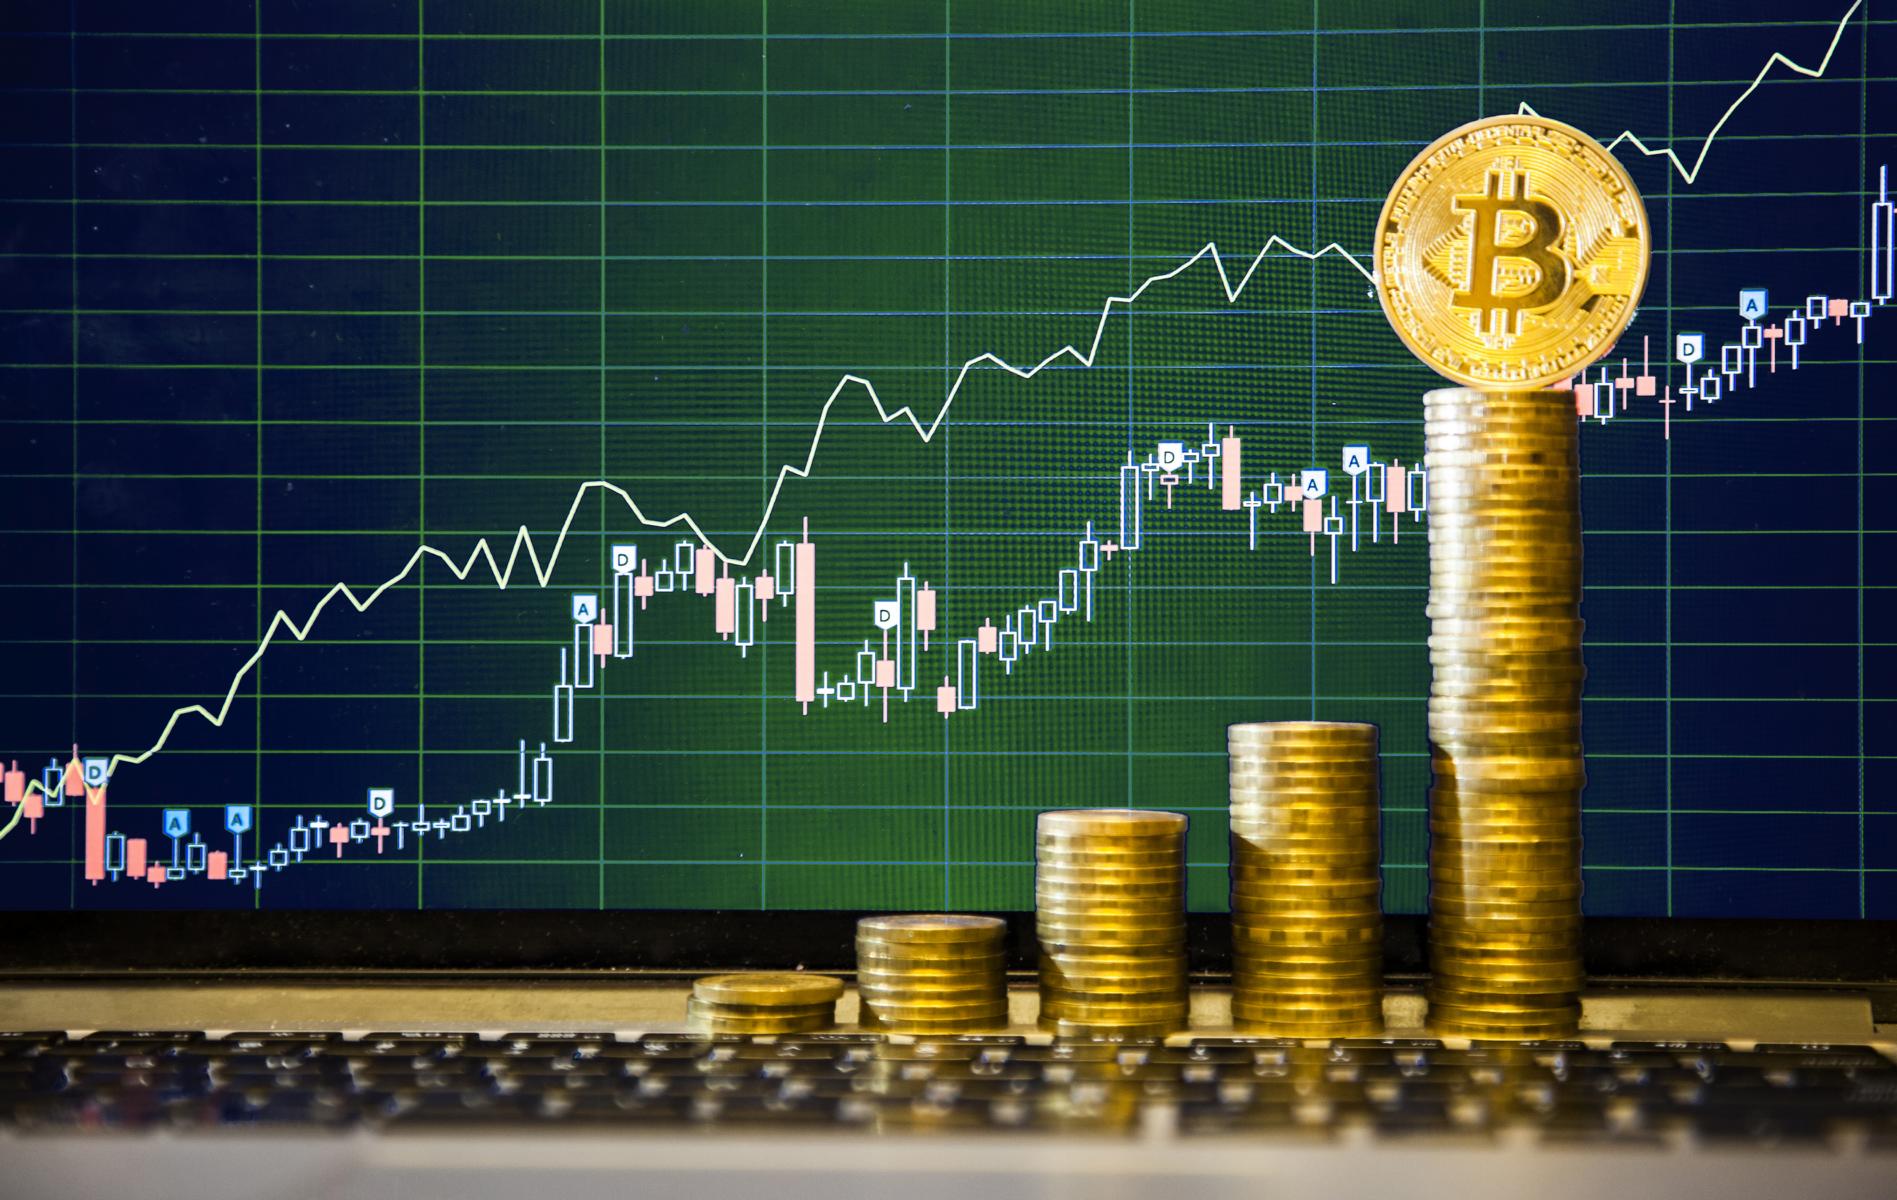 Gold Price Soared 350% Post-ETF Approval: Is Bitcoin (BTC) Next to Rocket to $150,000?